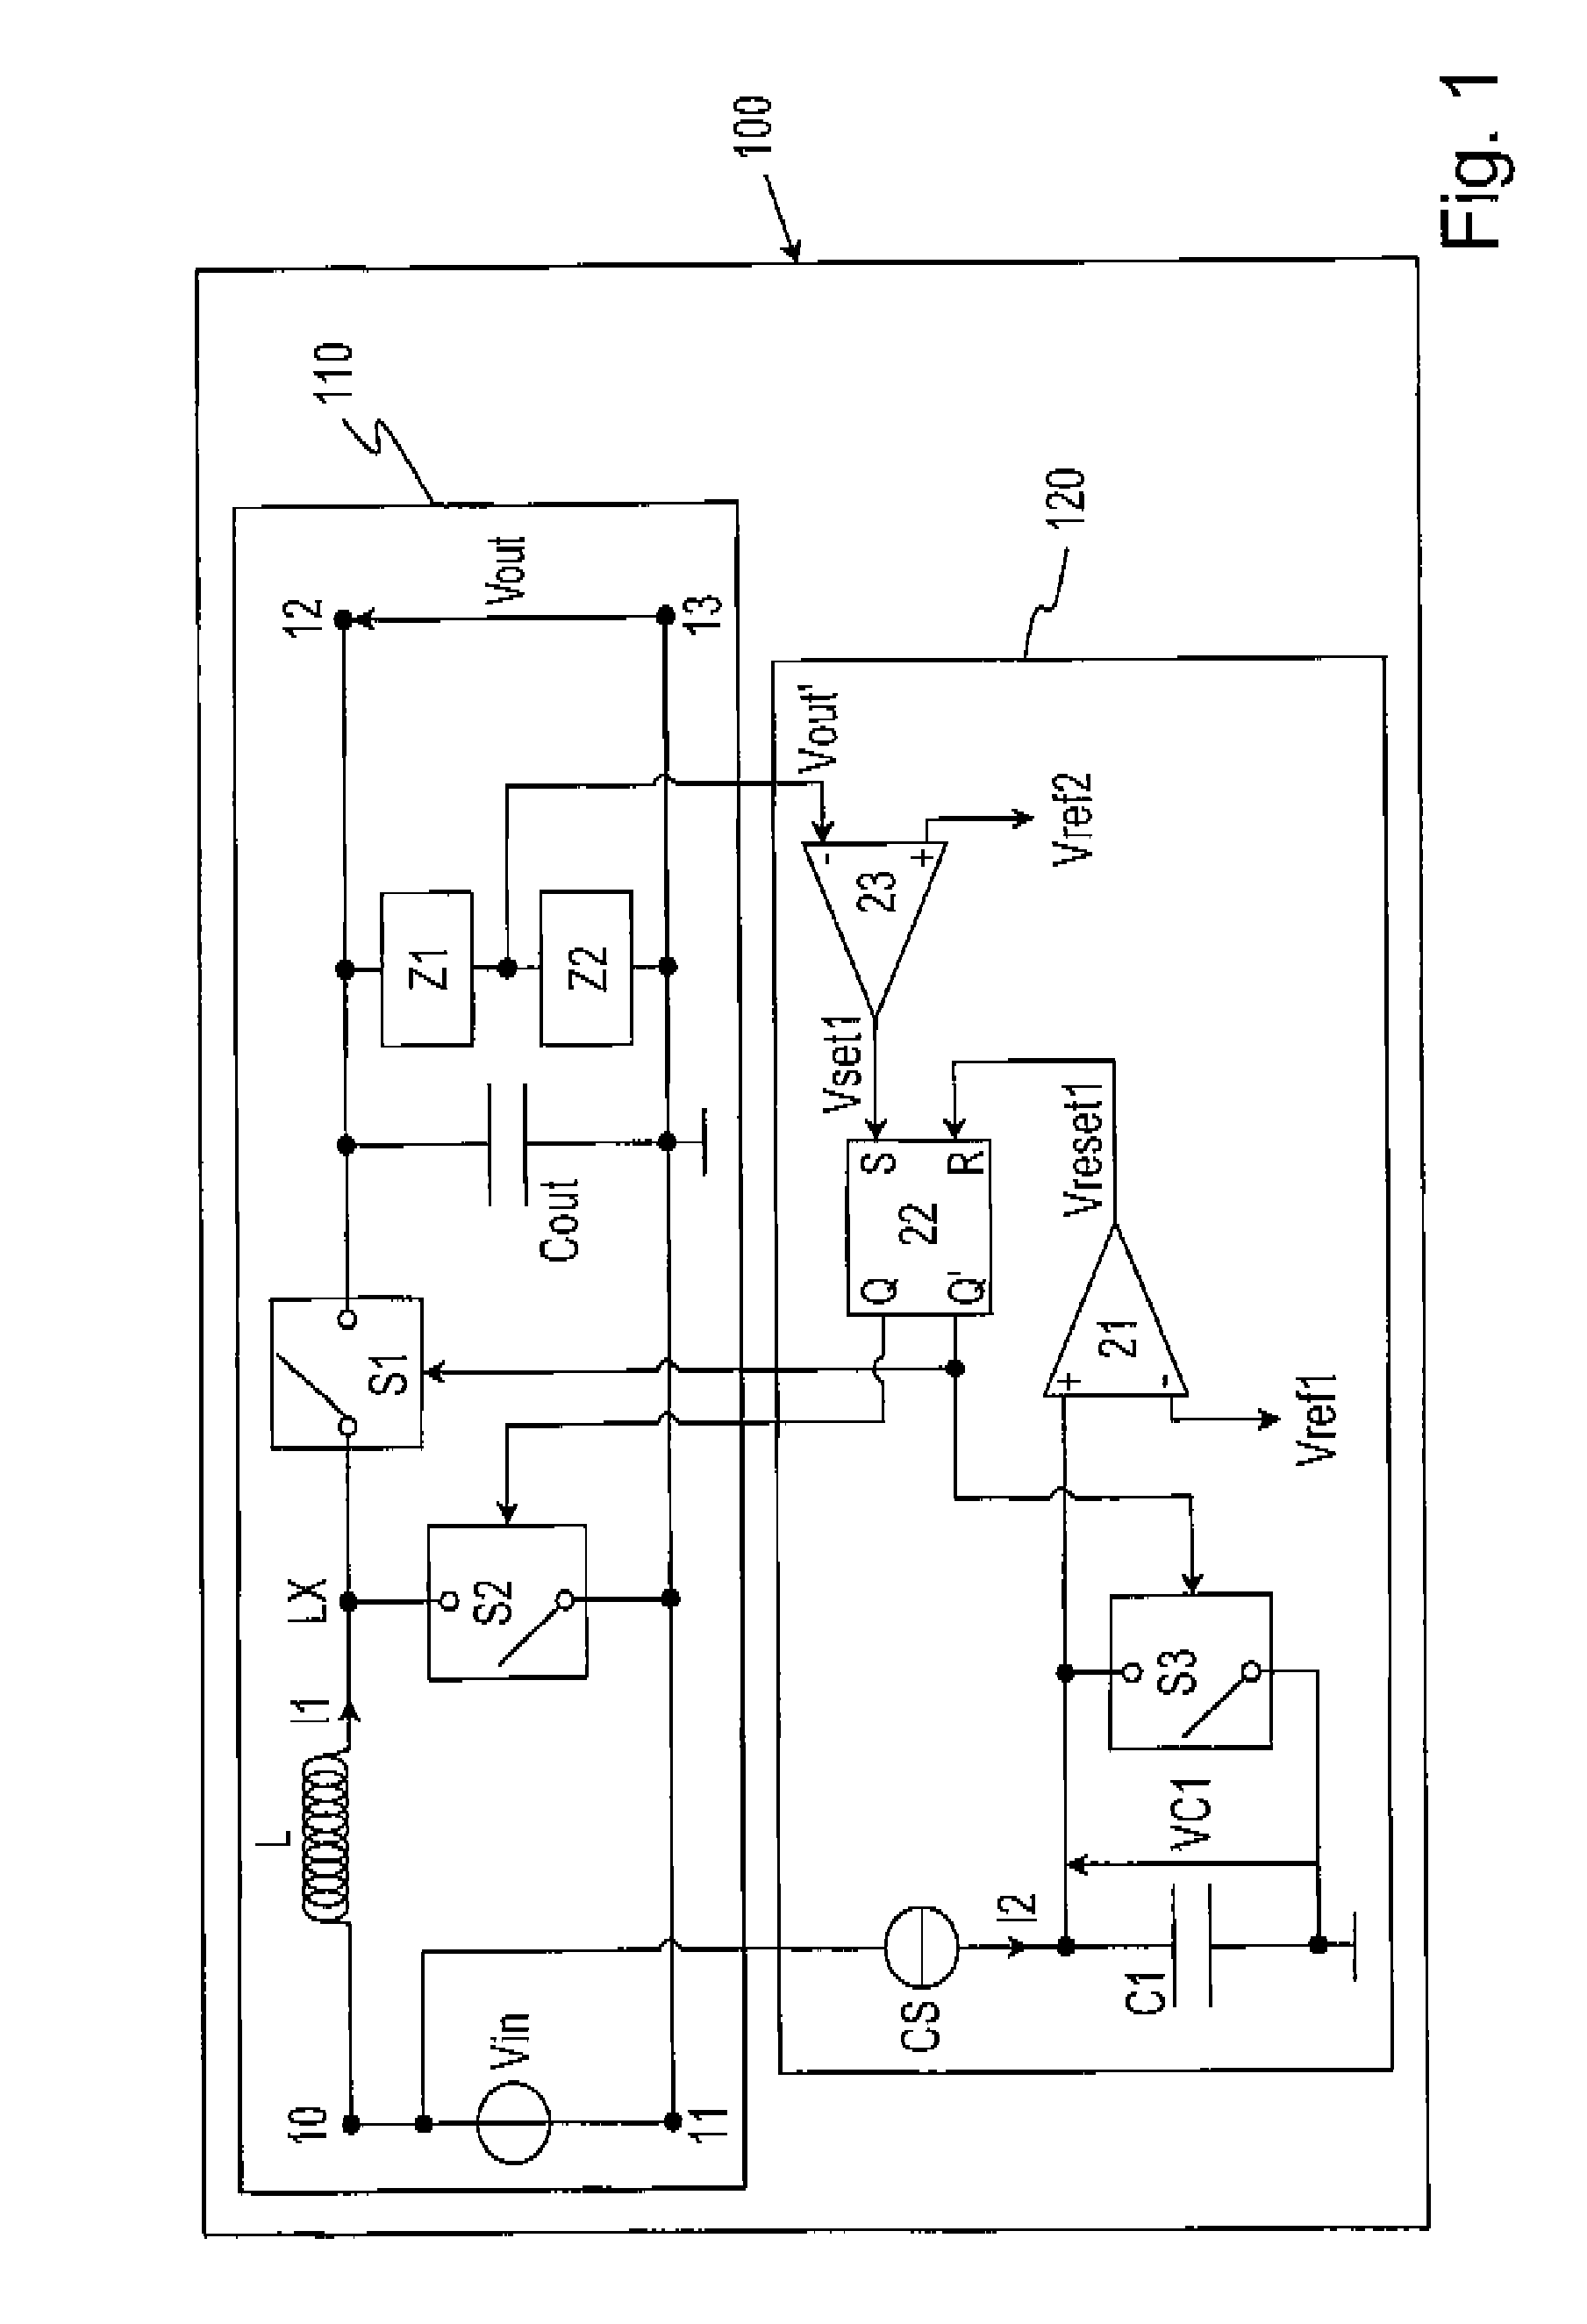 Lower power controller for DC to DC converters